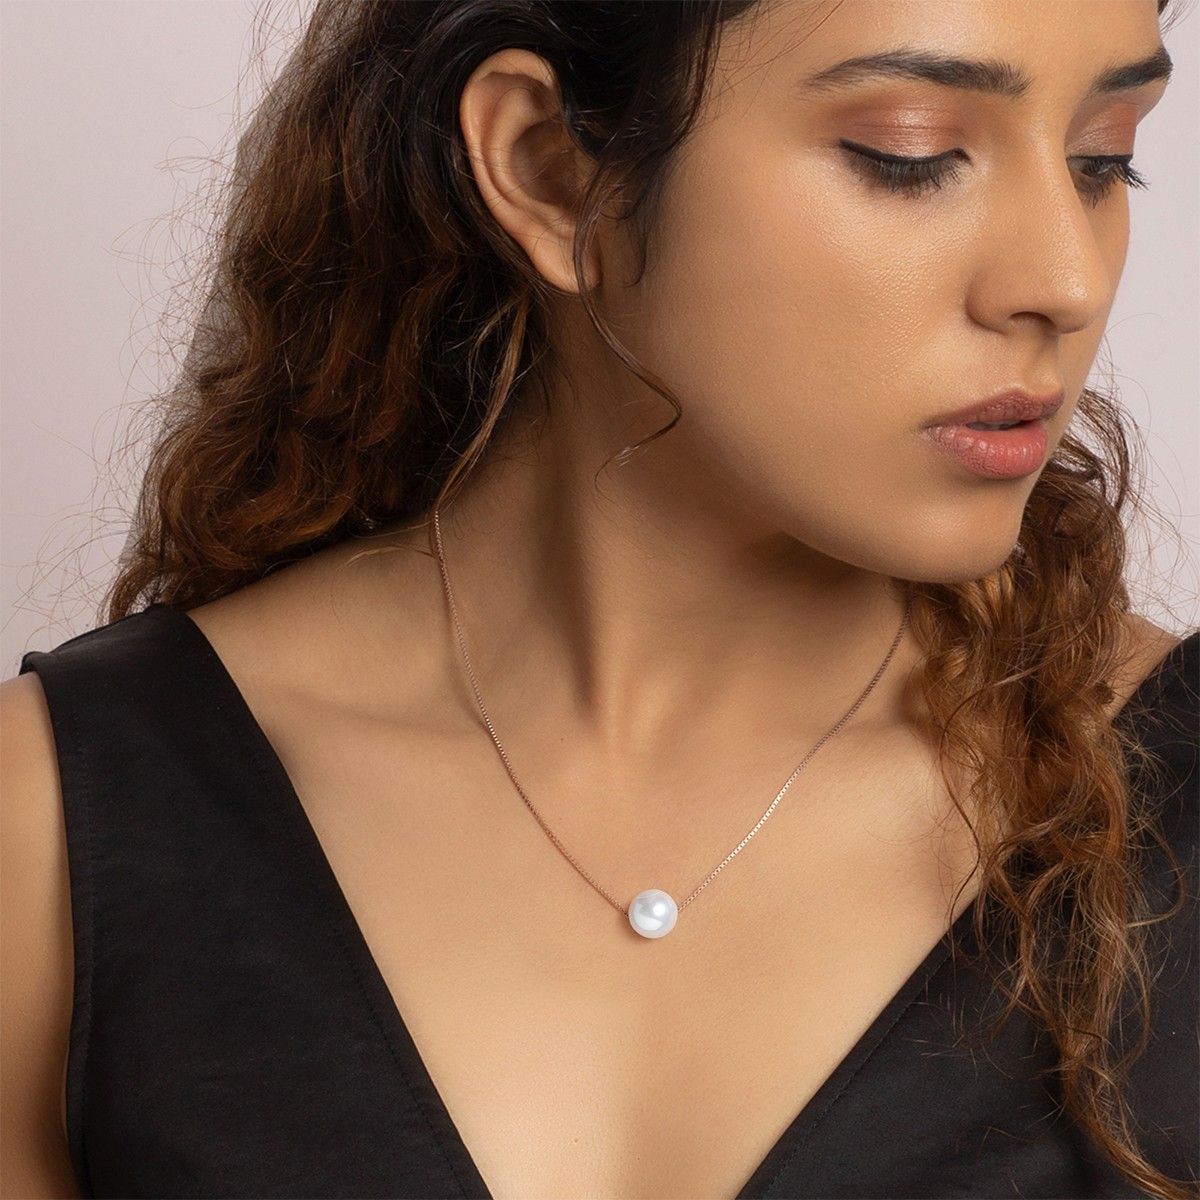 Surat Diamond Eternity - 4 Line Gold Plated Pendant & Freshwater Pearl  Necklace for Women (SN5) Pearl Gold-plated Plated Metal Necklace Price in  India - Buy Surat Diamond Eternity - 4 Line